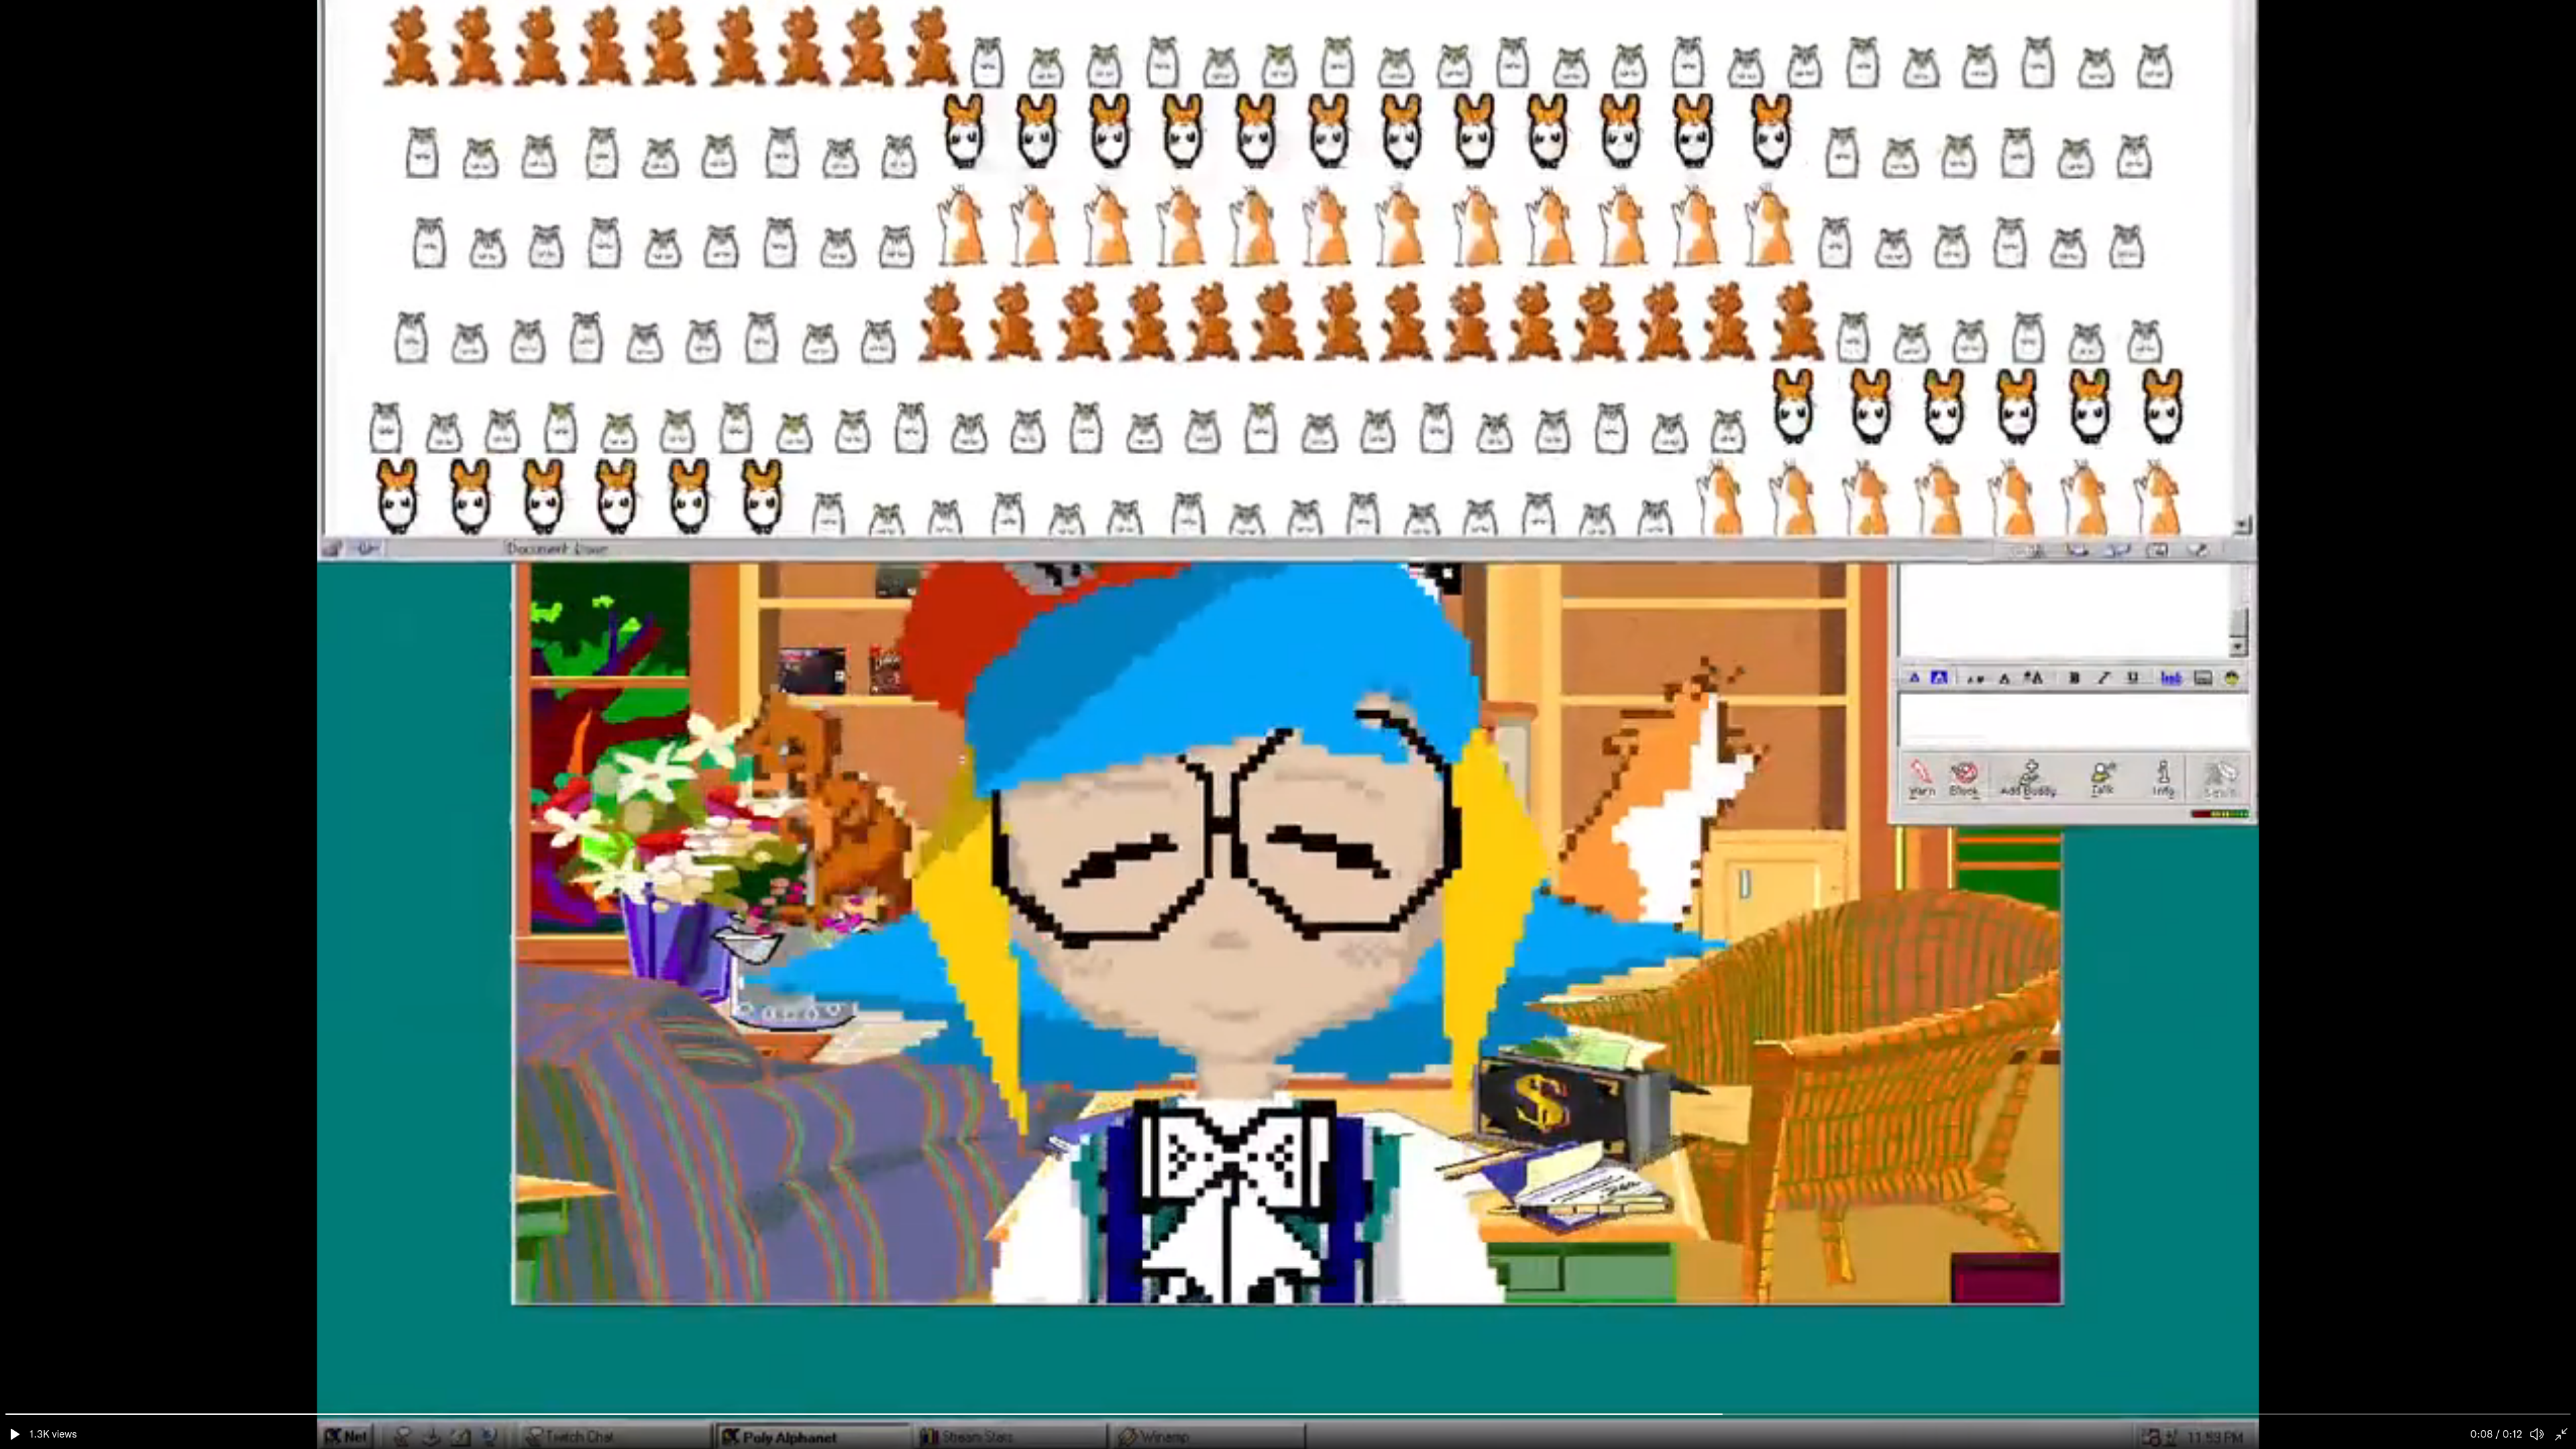 late 90s web1/windows aesthetic that isn't just nostalgia but pokes fun at how absurd it was + a sincere streamer is next level (just noticed the Microsoft Bob riff here lol)